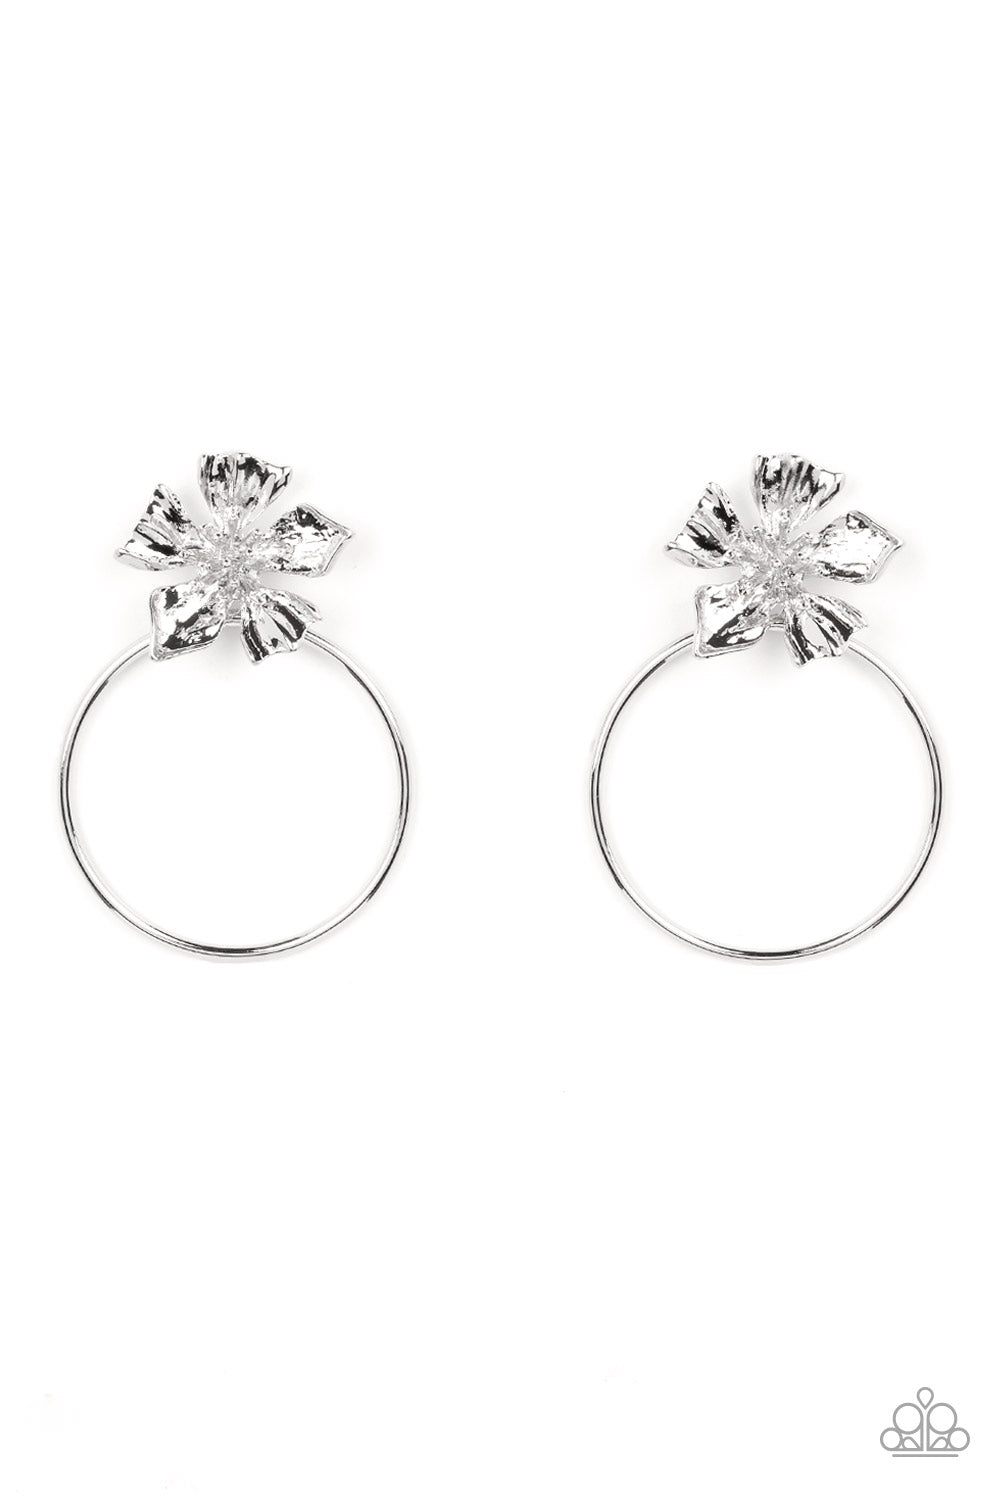 Buttercup Bliss Silver Flower Post Earrings - Paparazzi Accessories- lightbox - CarasShop.com - $5 Jewelry by Cara Jewels